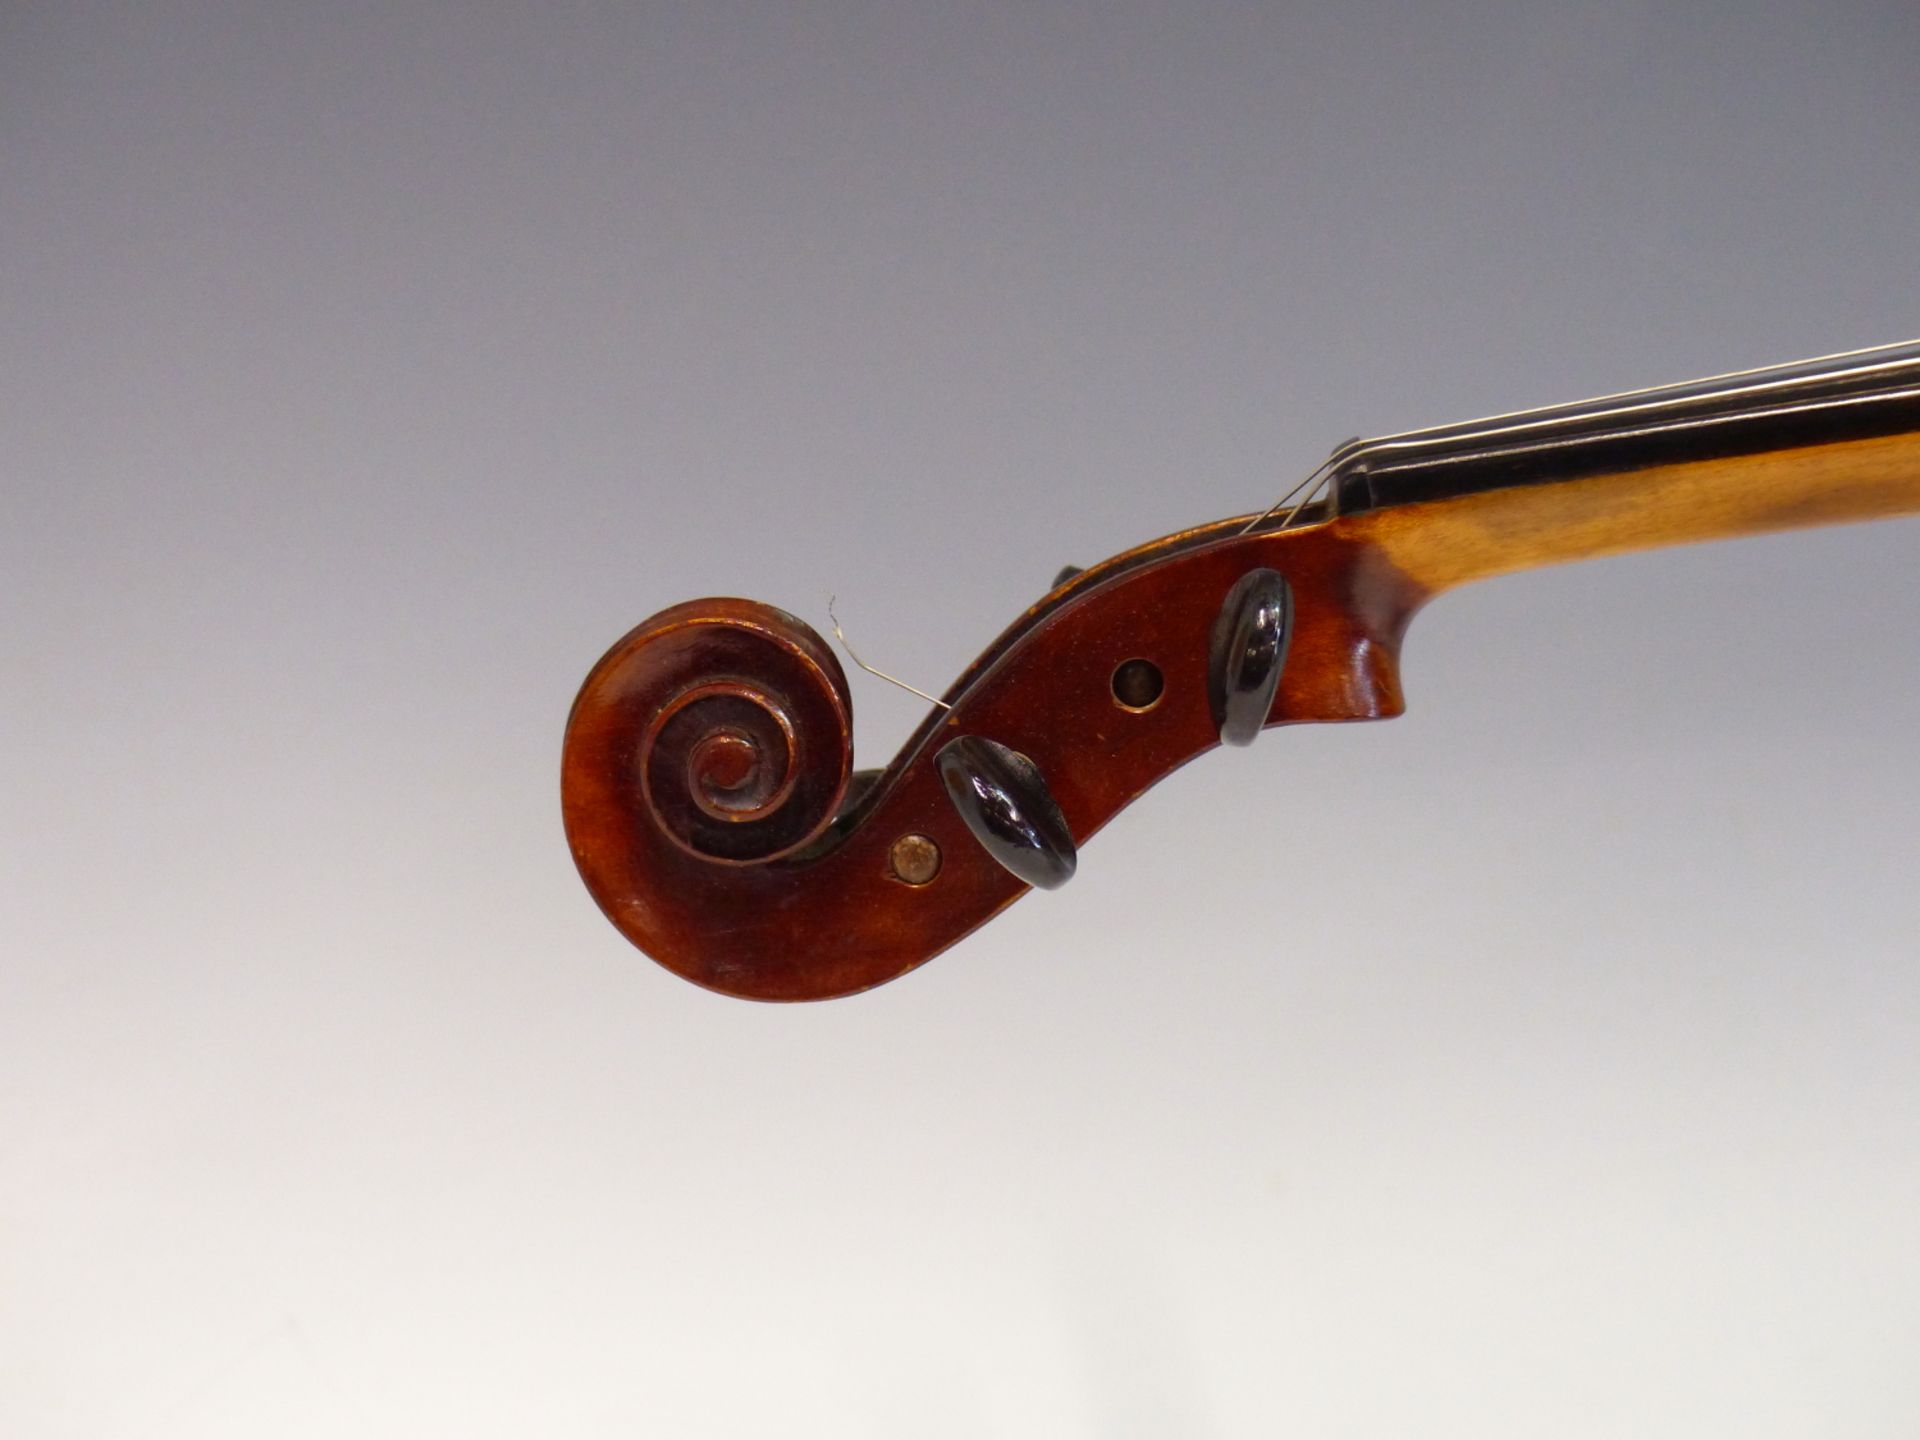 A 20TH CENTURY VIOLIN WITH LABEL " ANTONIUS STRADIUARIUS CREMONENSIS". CASED WITH A SILVER PLATE - Image 6 of 19